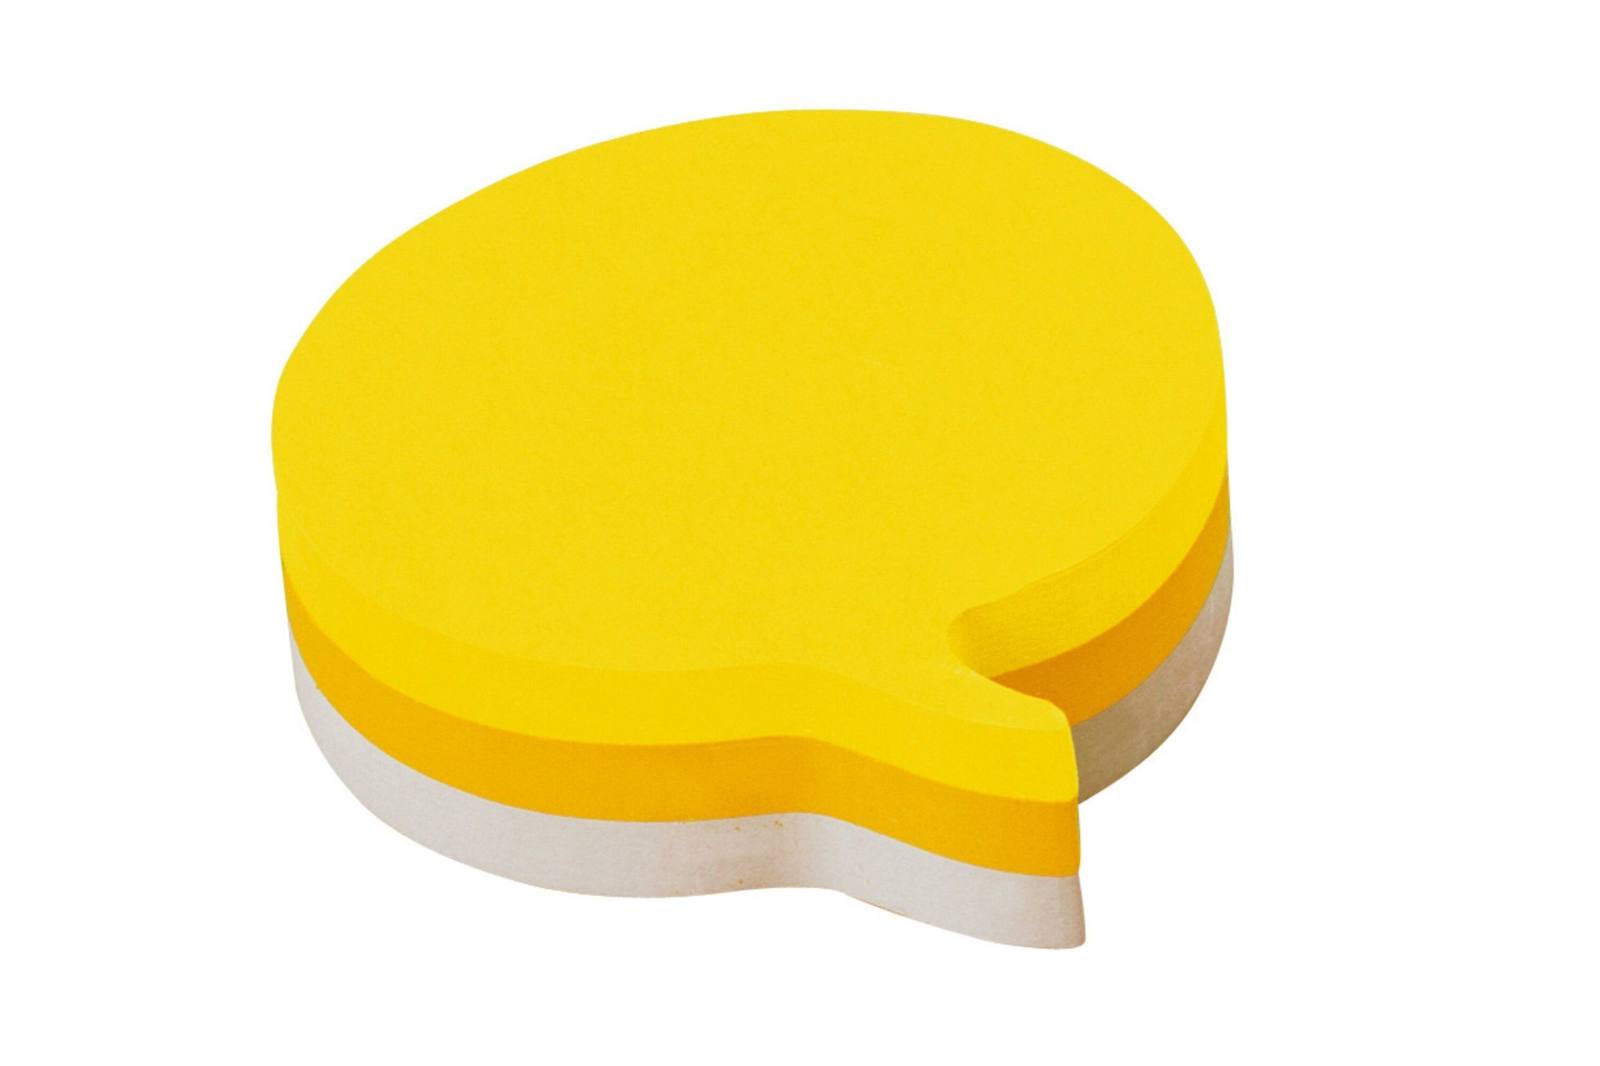 3M Post-it Cube 2007SP, 70 mm x 70 mm, yellow, ultra-yellow, white, 1 cube of 225 sheets